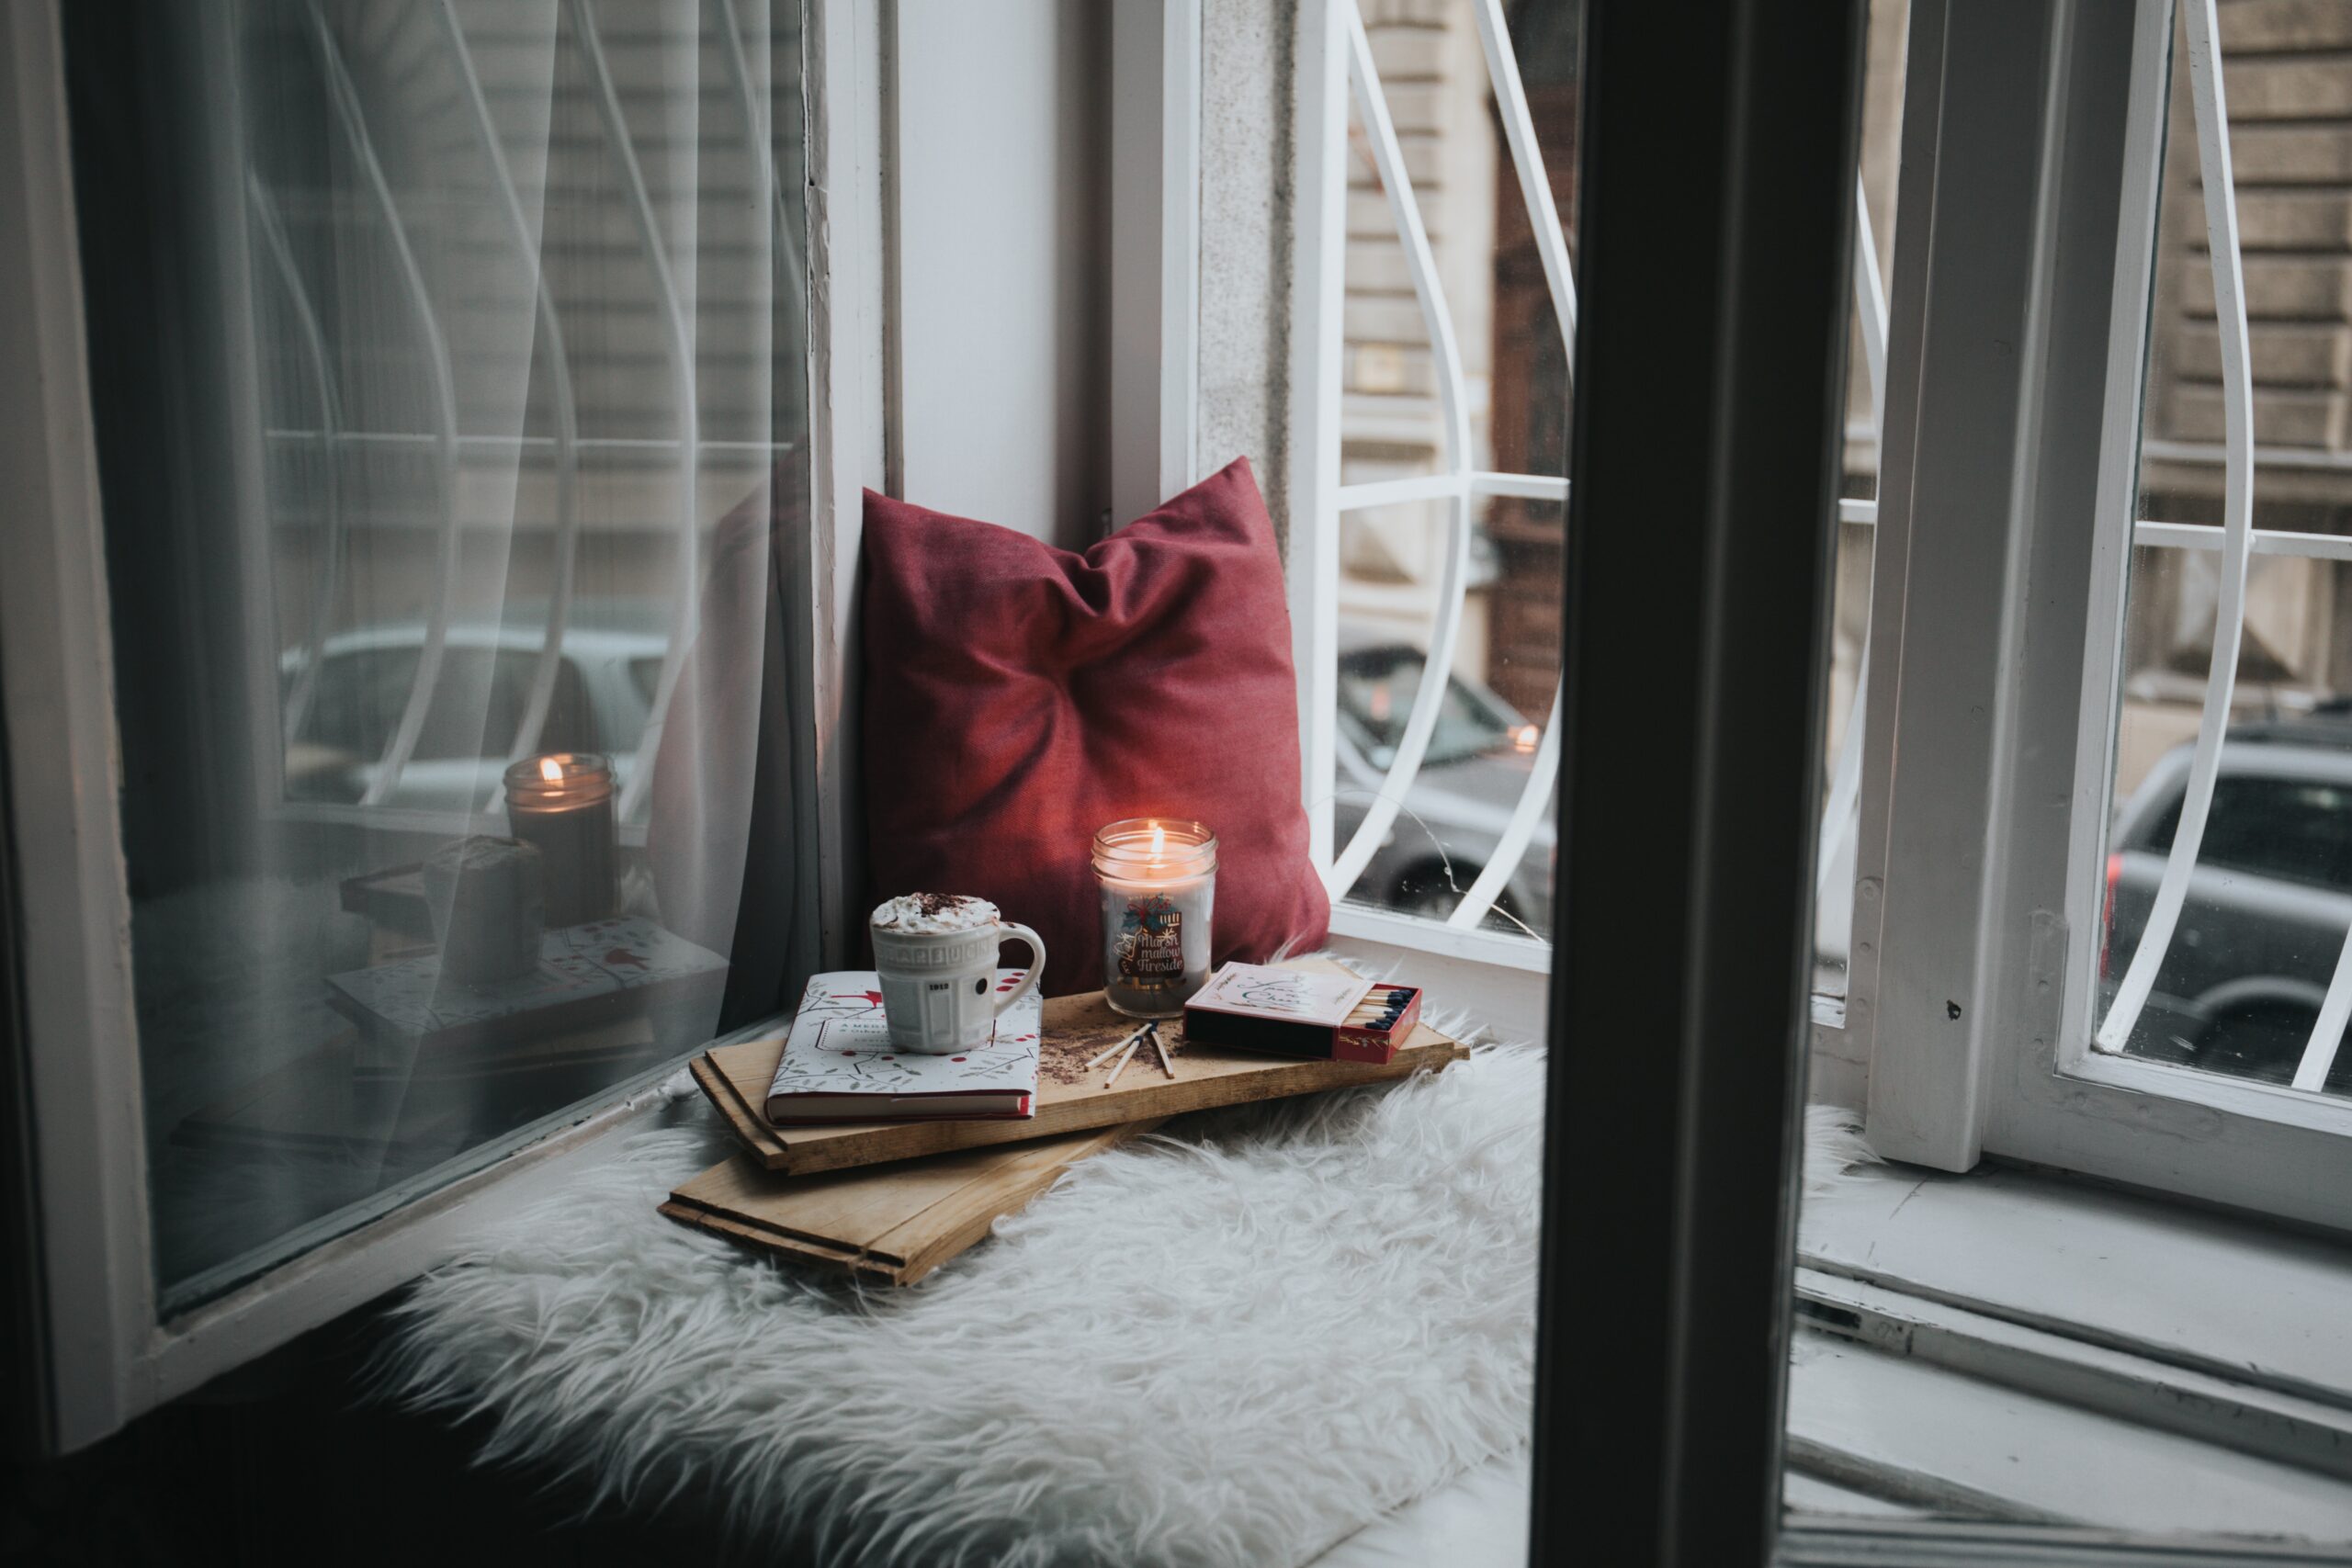 self-care set up by a window, with a pillow, coffee, and books